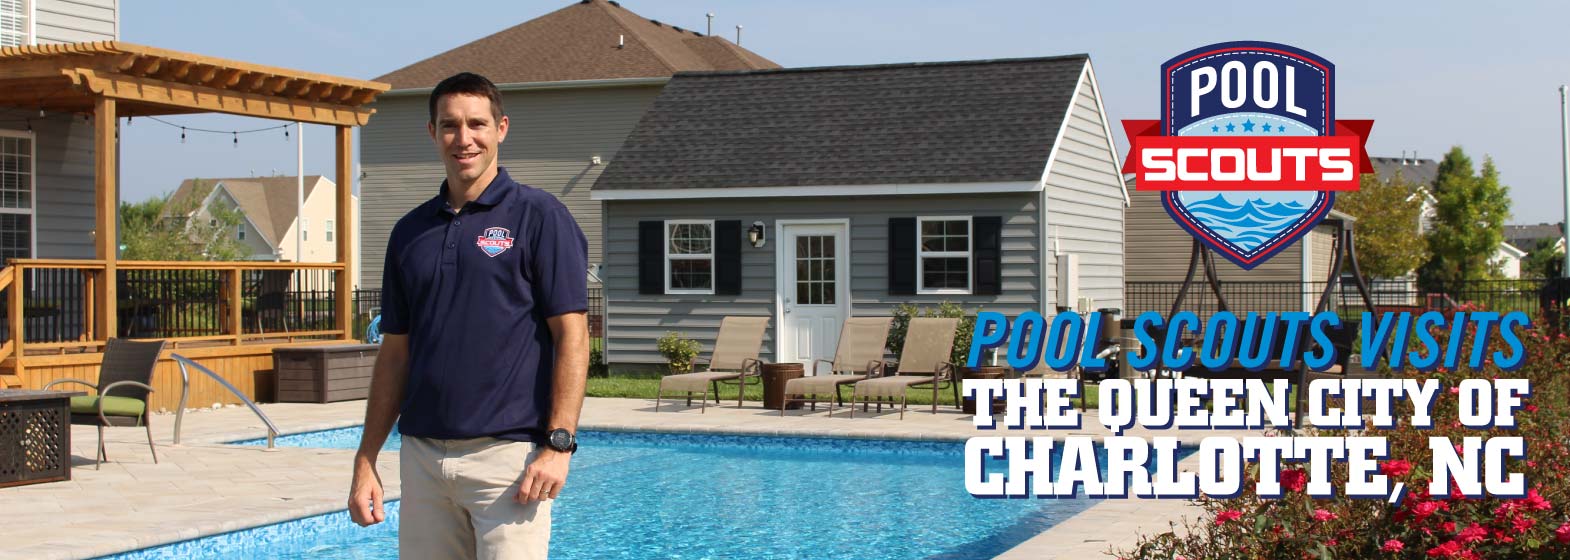 Pool technician standing in front of clear pool in Charlotte